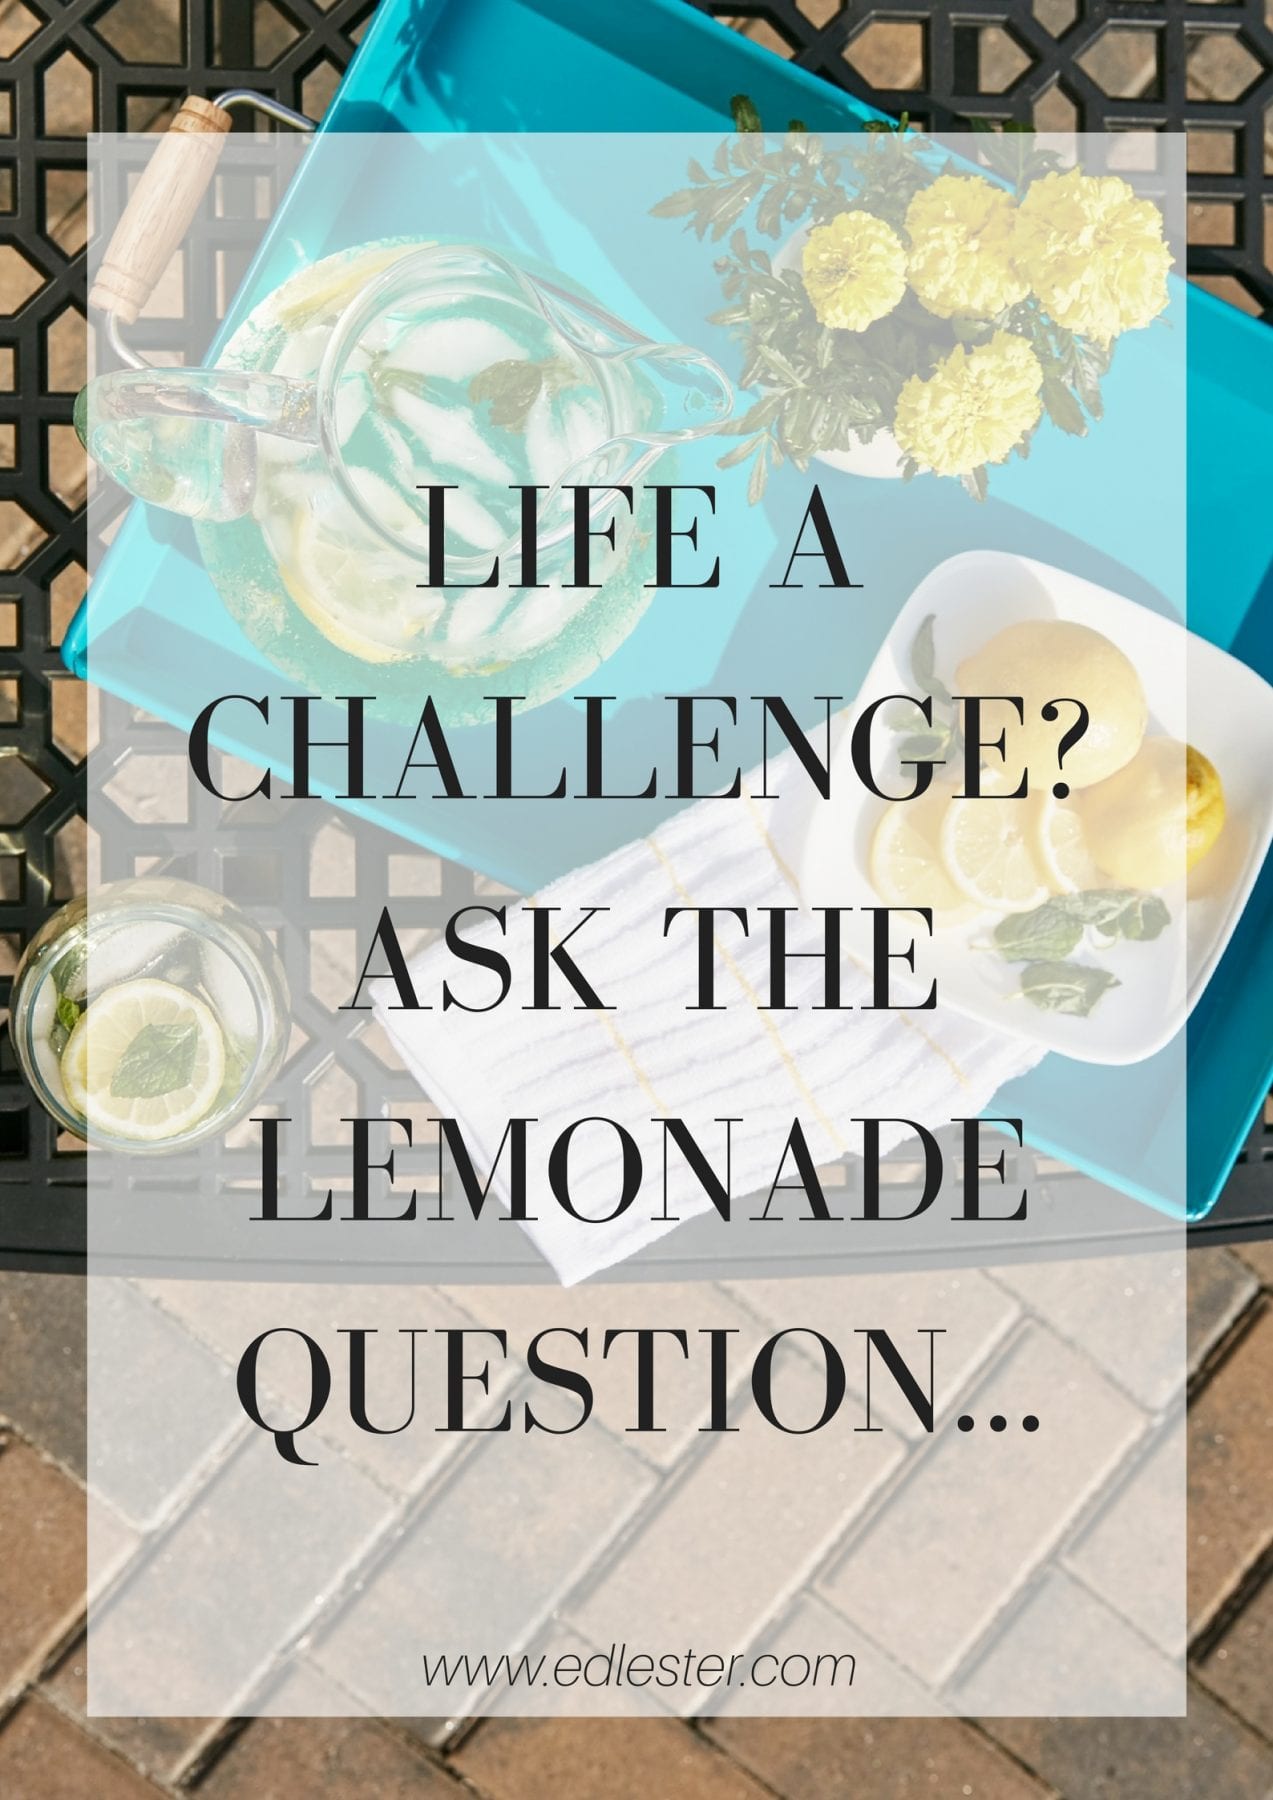 When Life Is A Challenge, Ask the Lemonade Question...